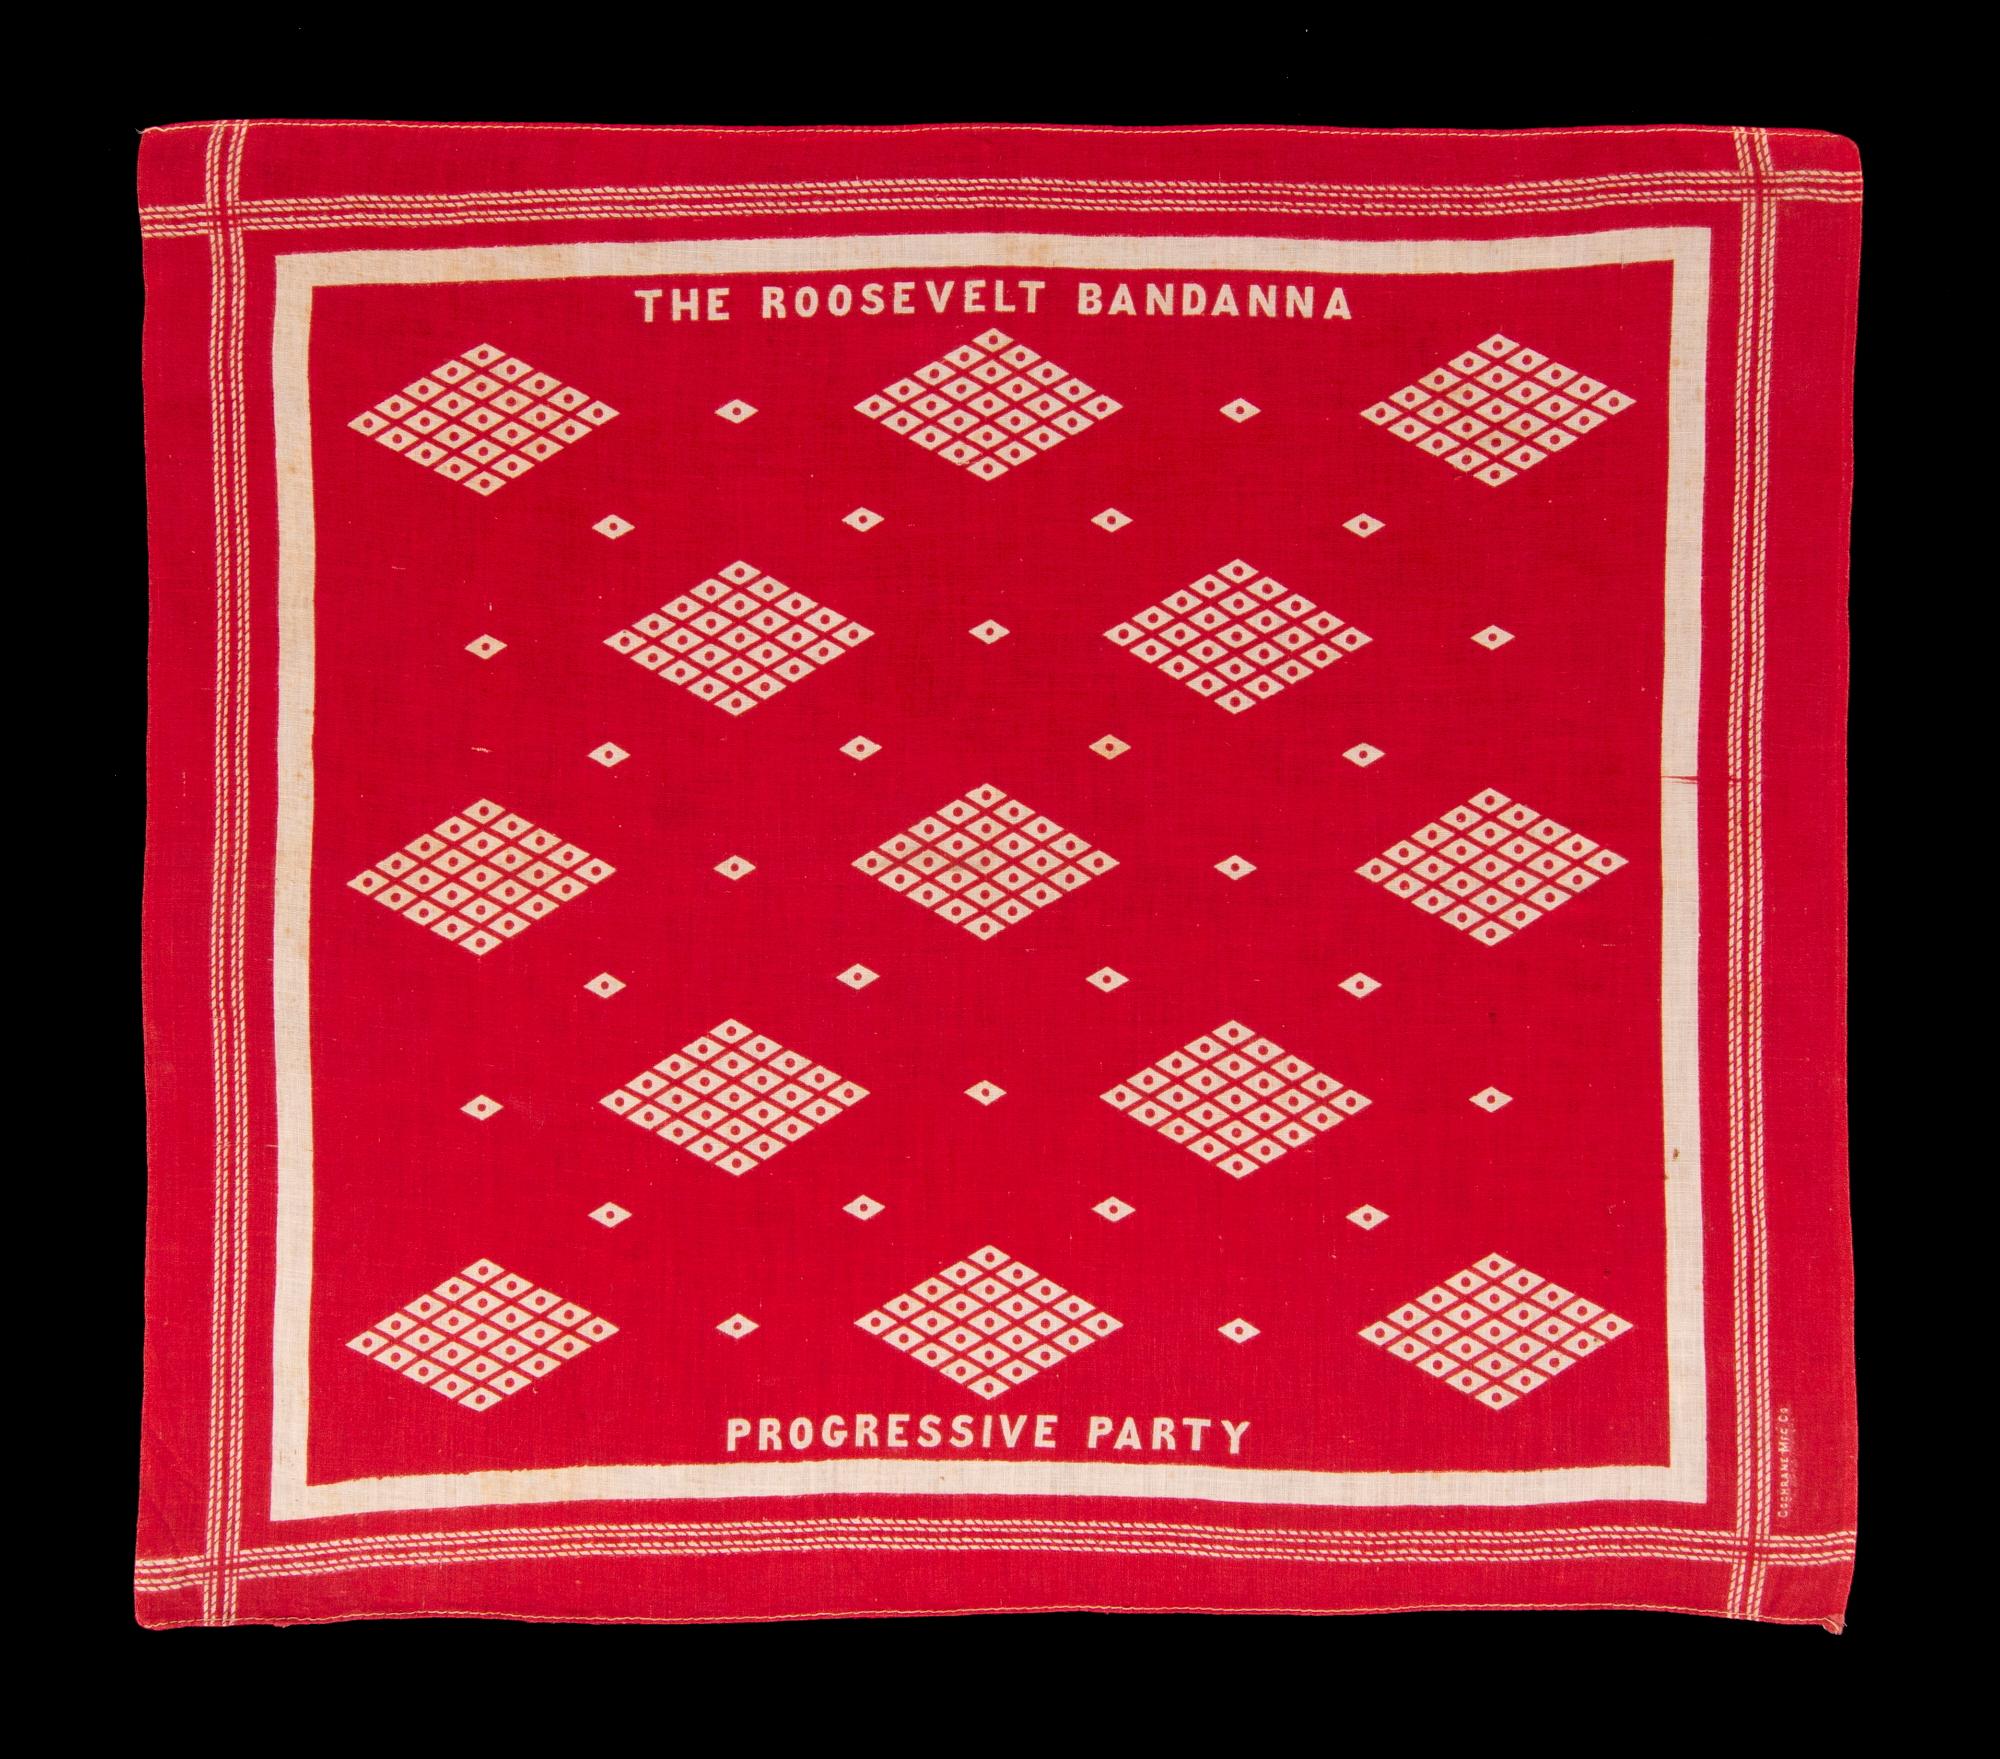 Turkey red bandanna, made for the 1912 presidential campaign of teddy Roosevelt, when he ran on the independent, progressive party (bull moose) ticket

Printed cotton kerchief, made for the 1912 presidential campaign of Theodore Roosevelt when he